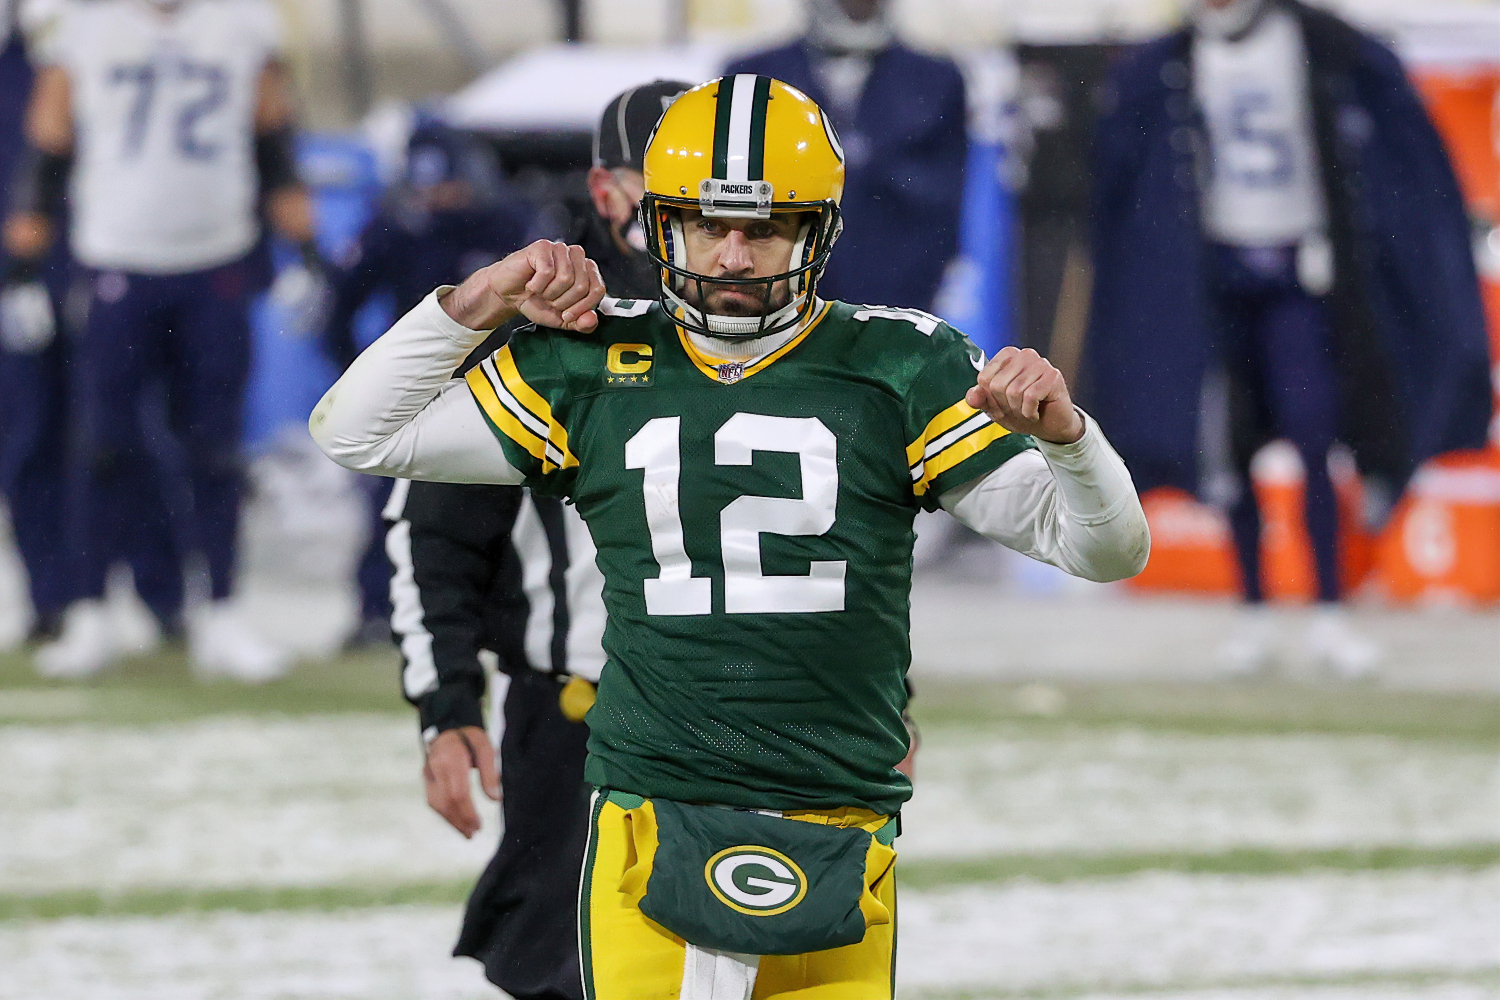 Aaron Rodgers is having an incredible season for the Green Bay Packers. So, how does he feel about potentially winning the NFL MVP award?